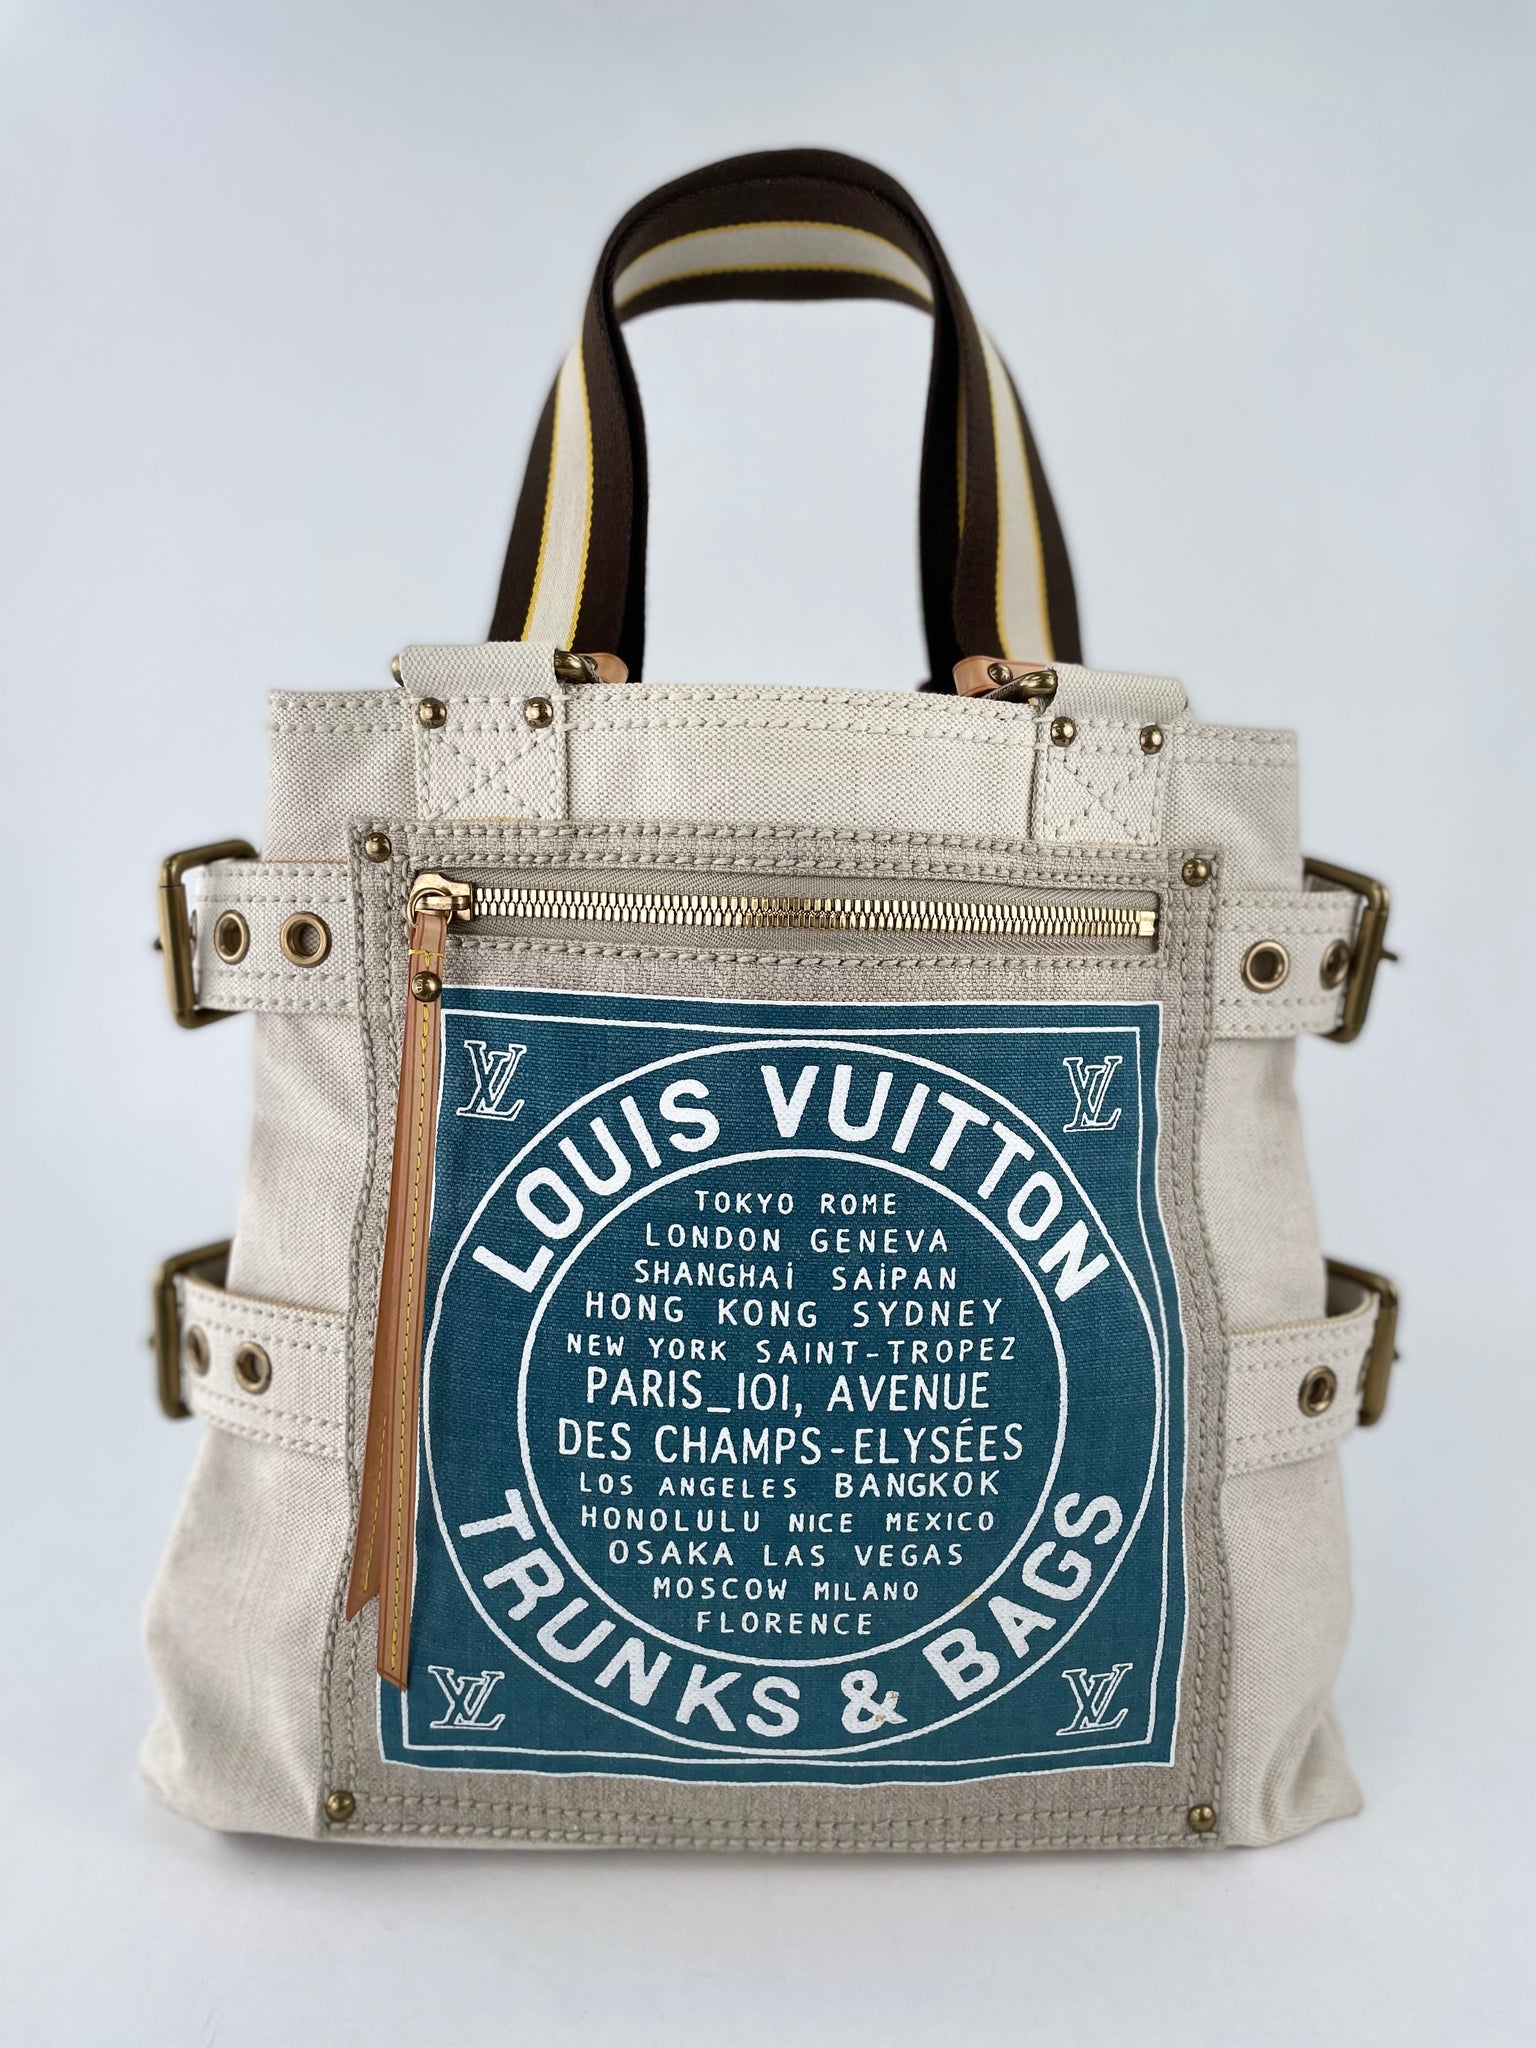 Louis Vuitton Neverfull Bags for sale in New York, New York